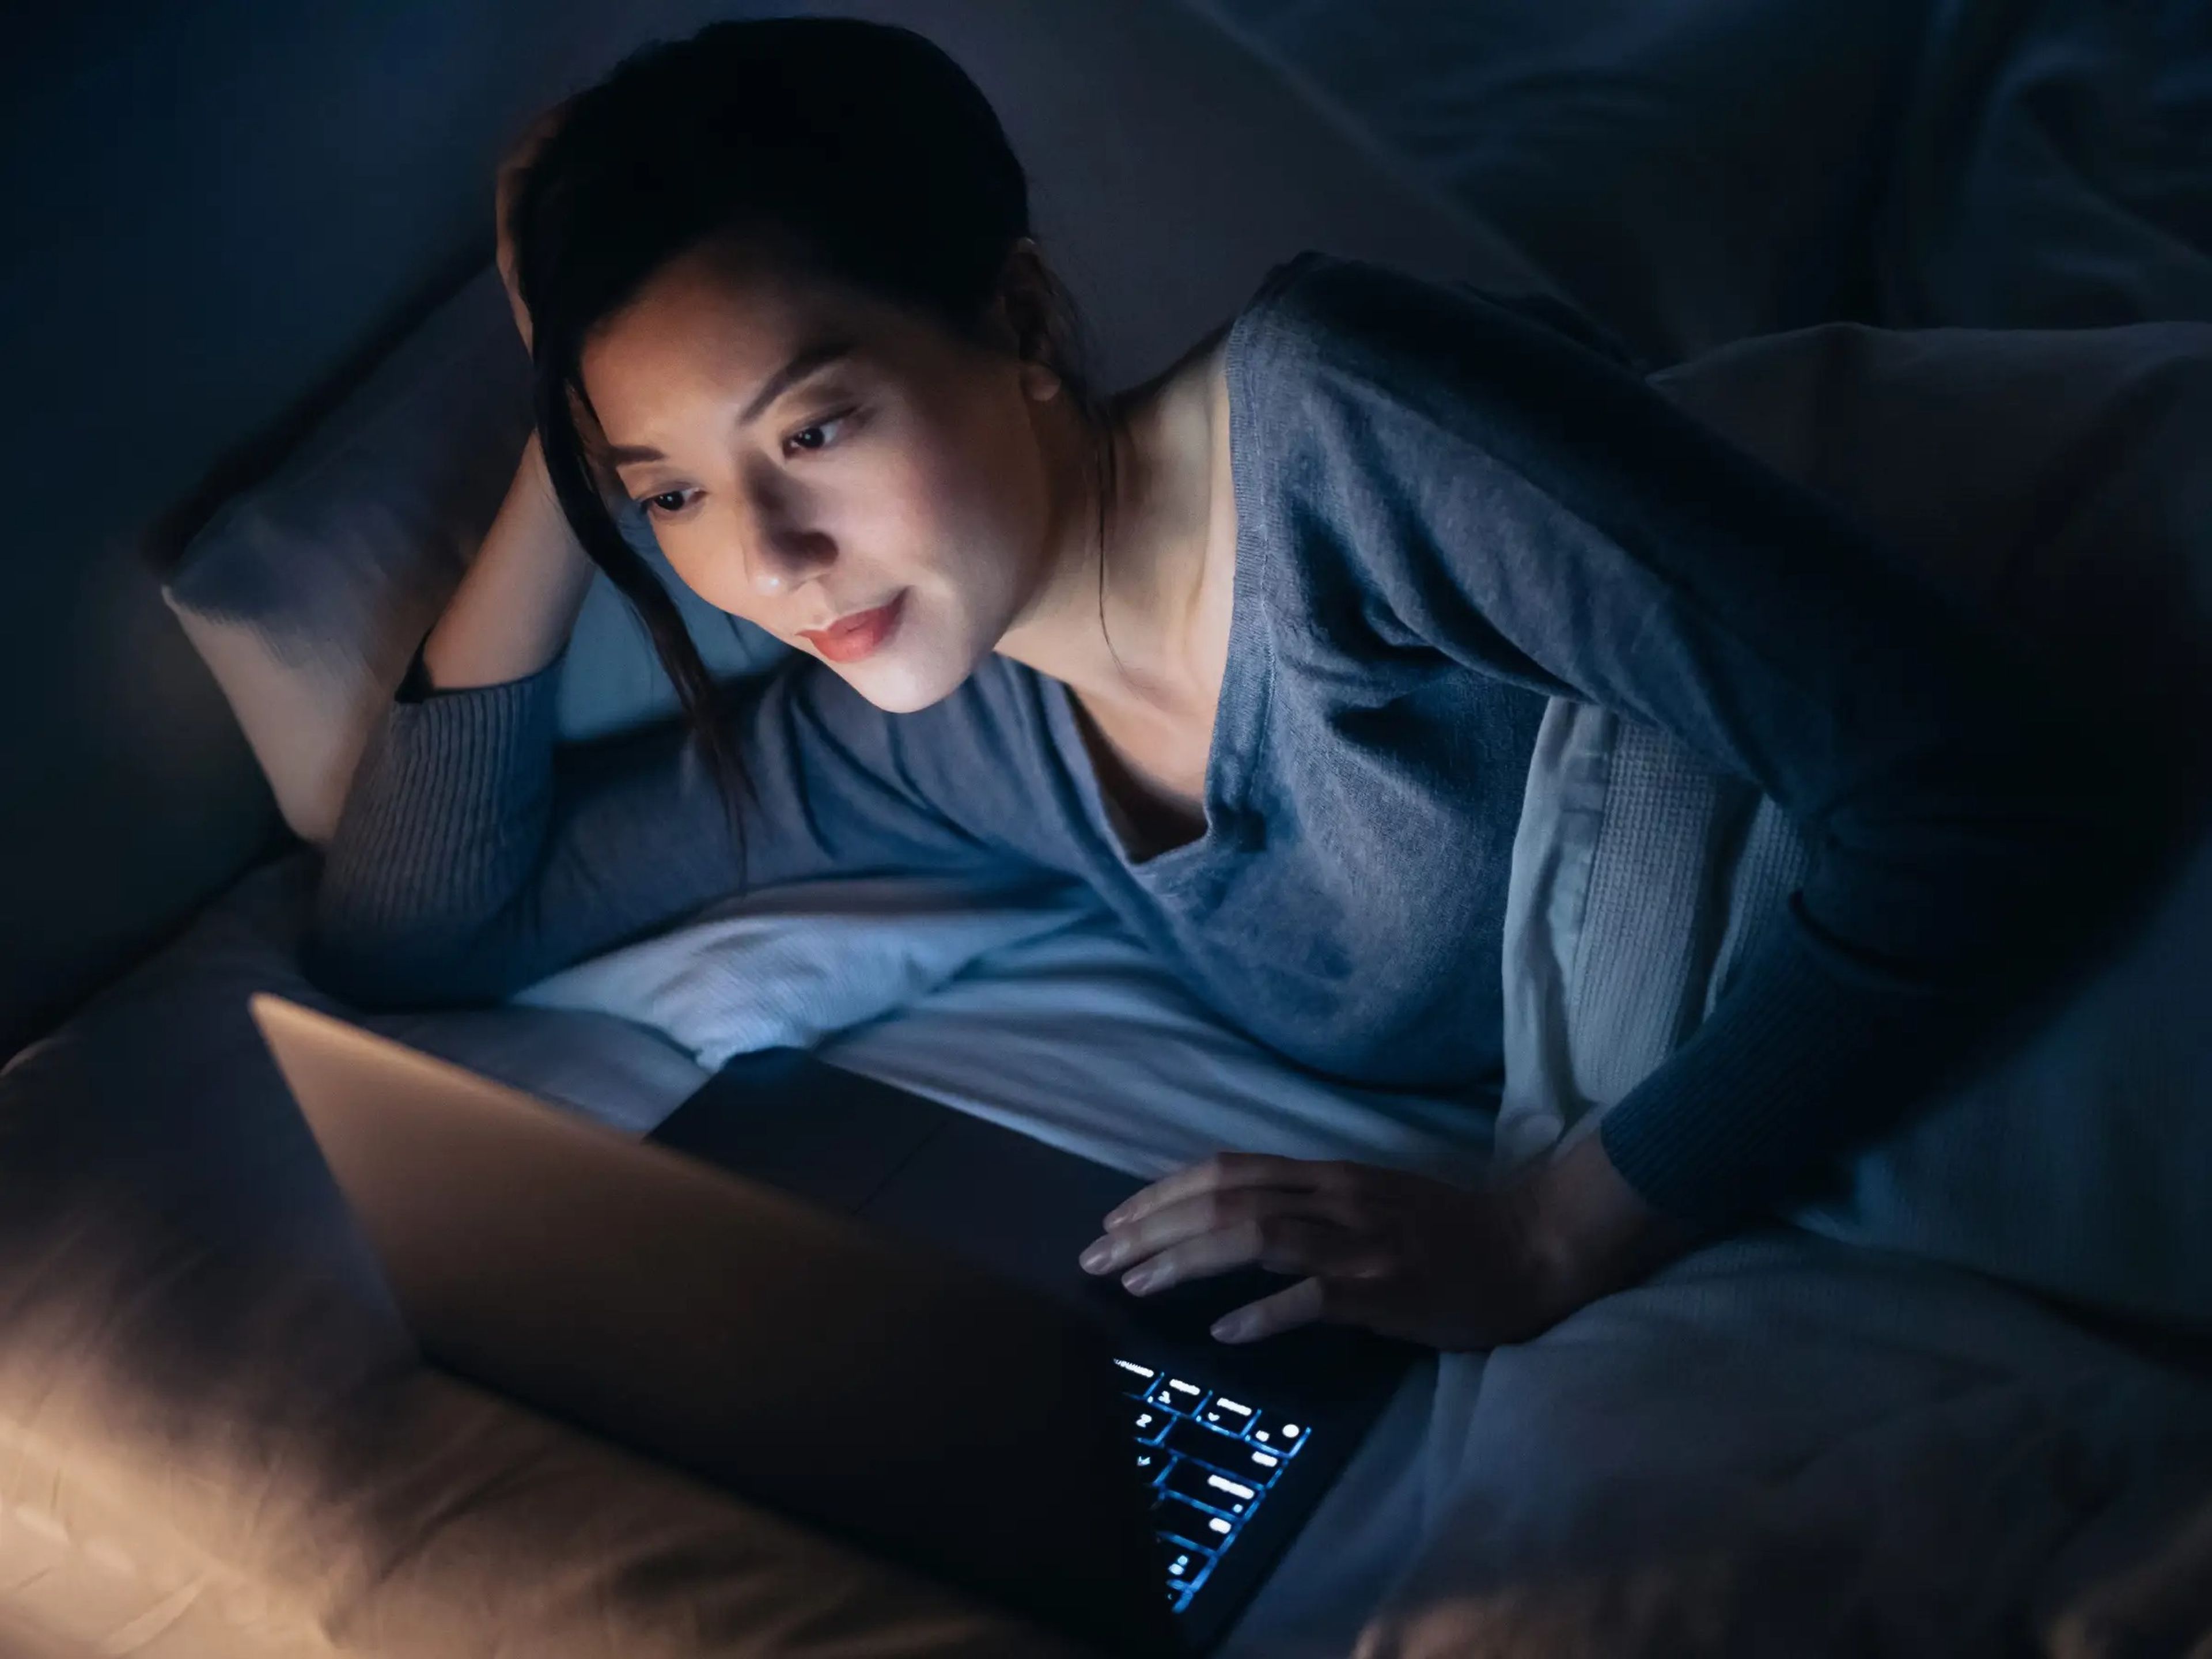 Woman using laptop in bed